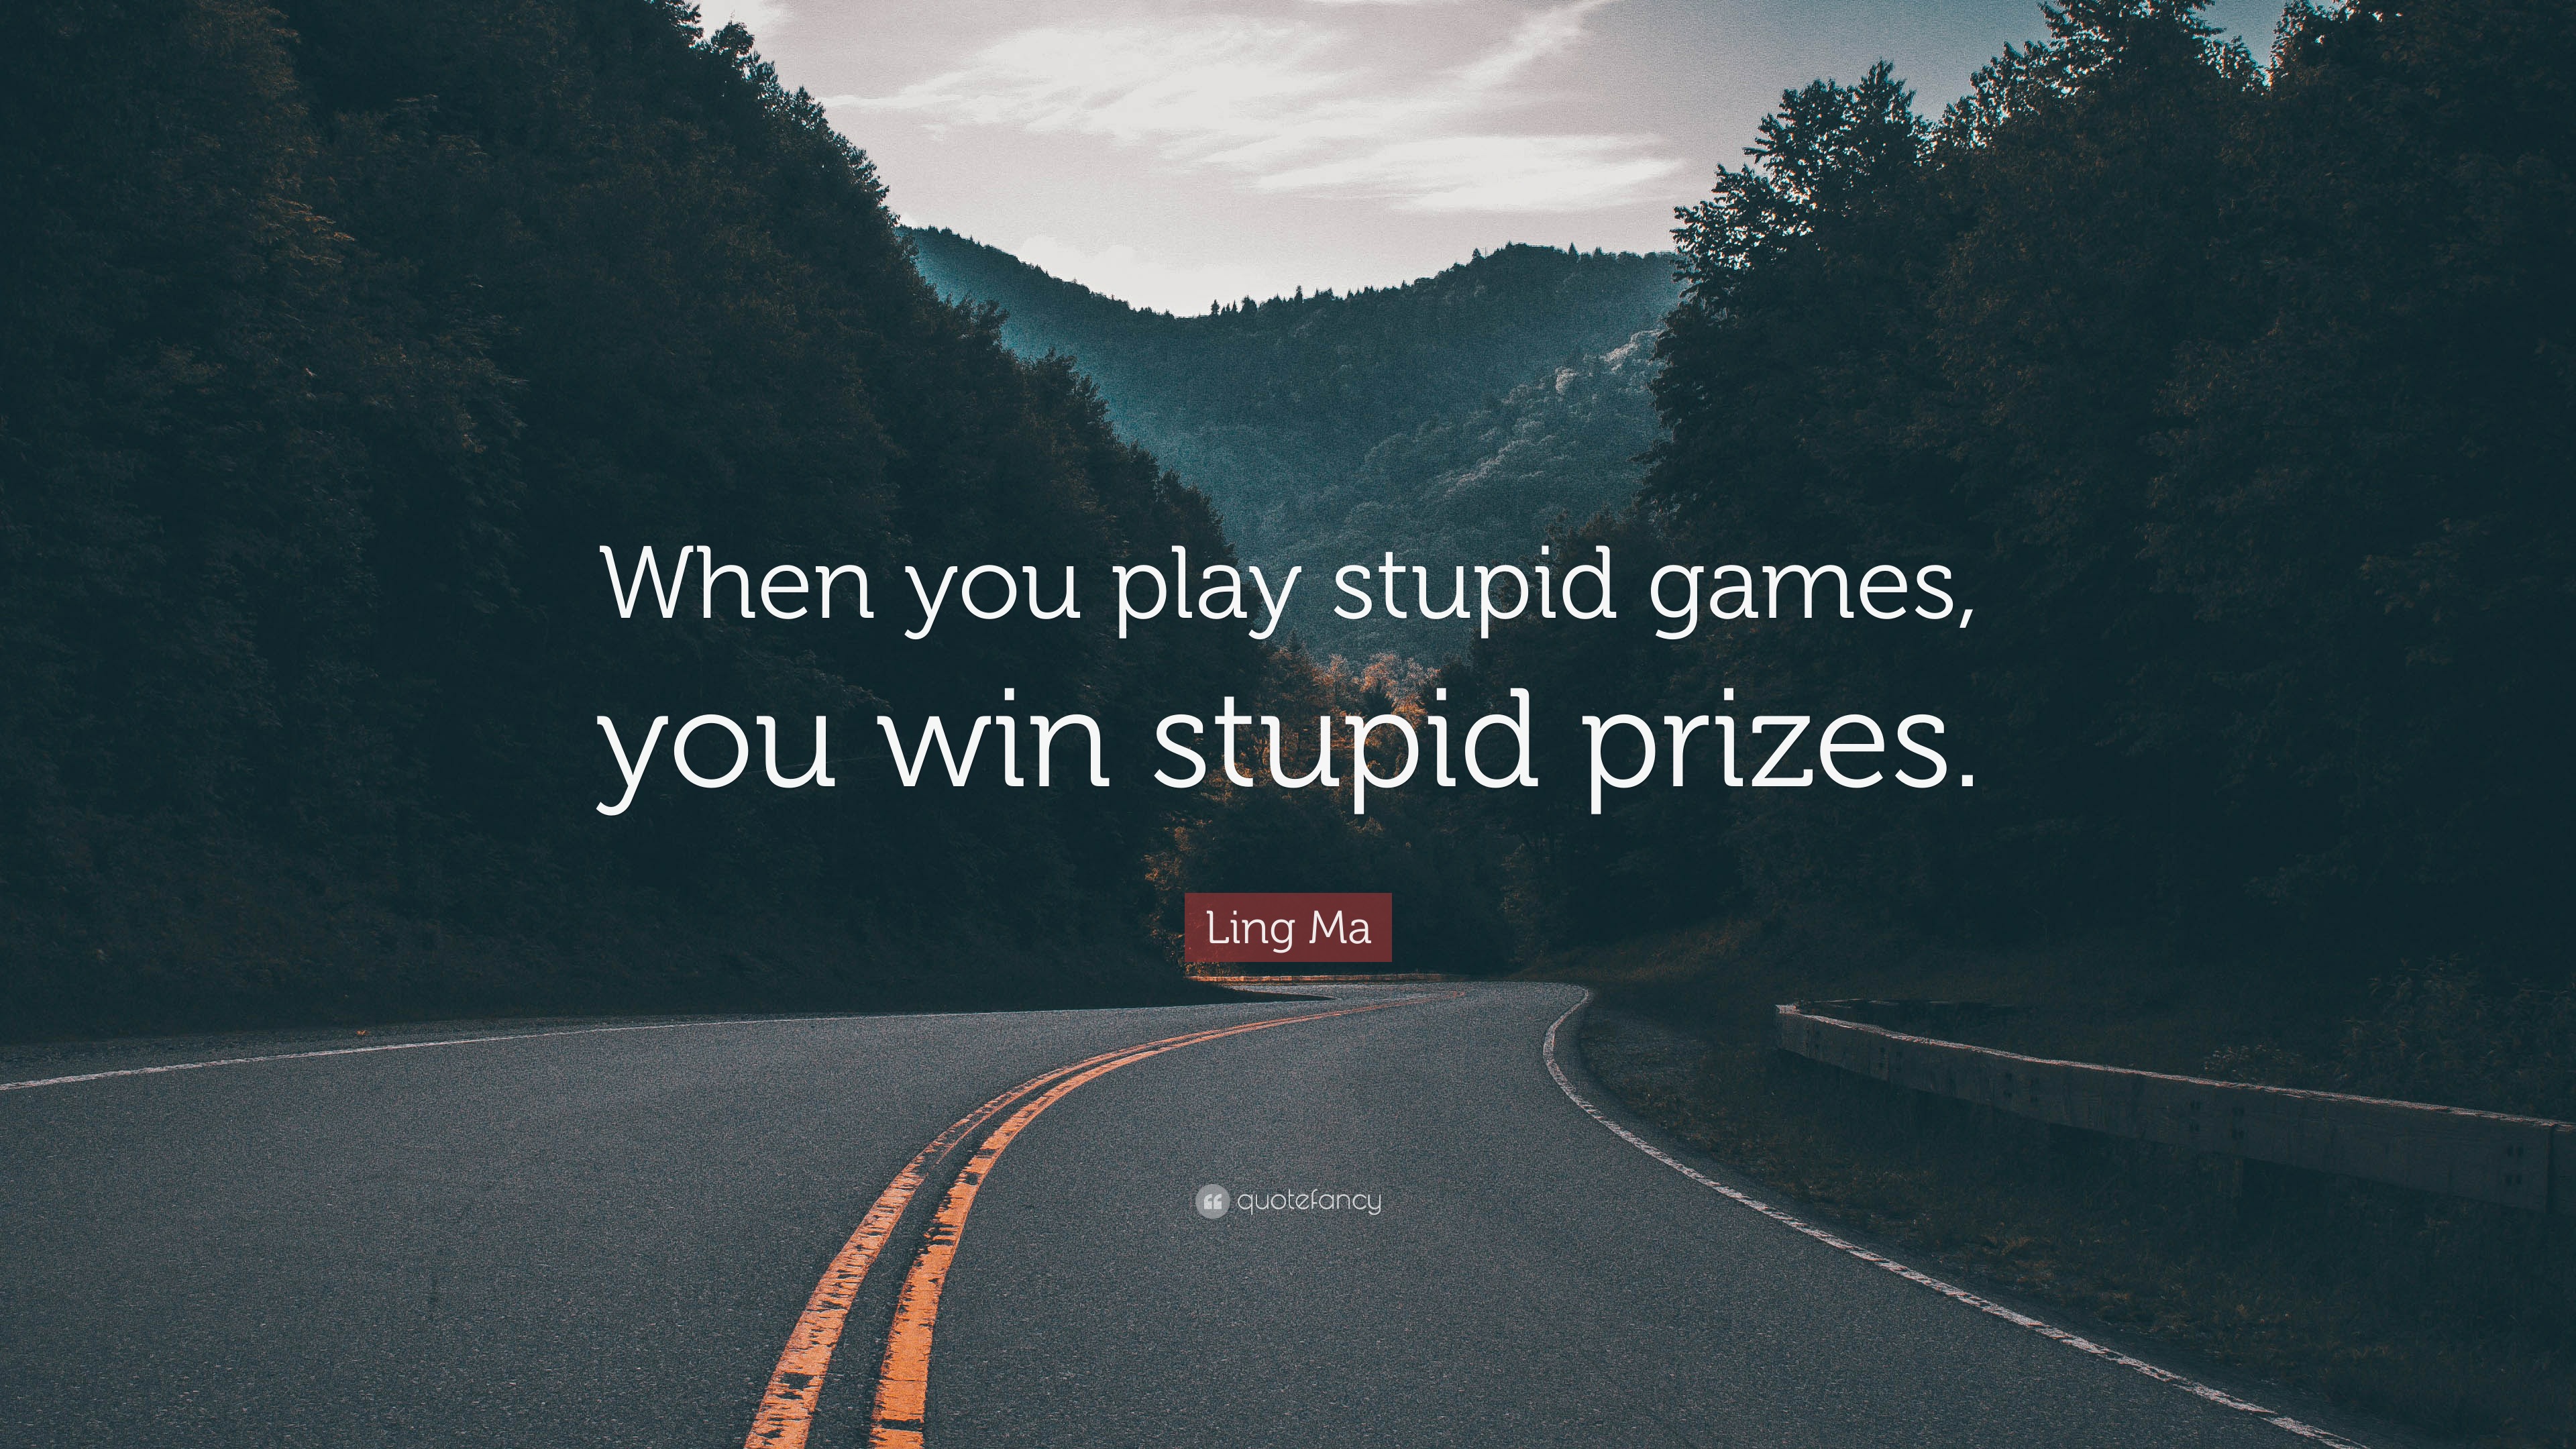 7754934-Ling-Ma-Quote-When-you-play-stupid-games-you-win-stupid-prizes.jpg